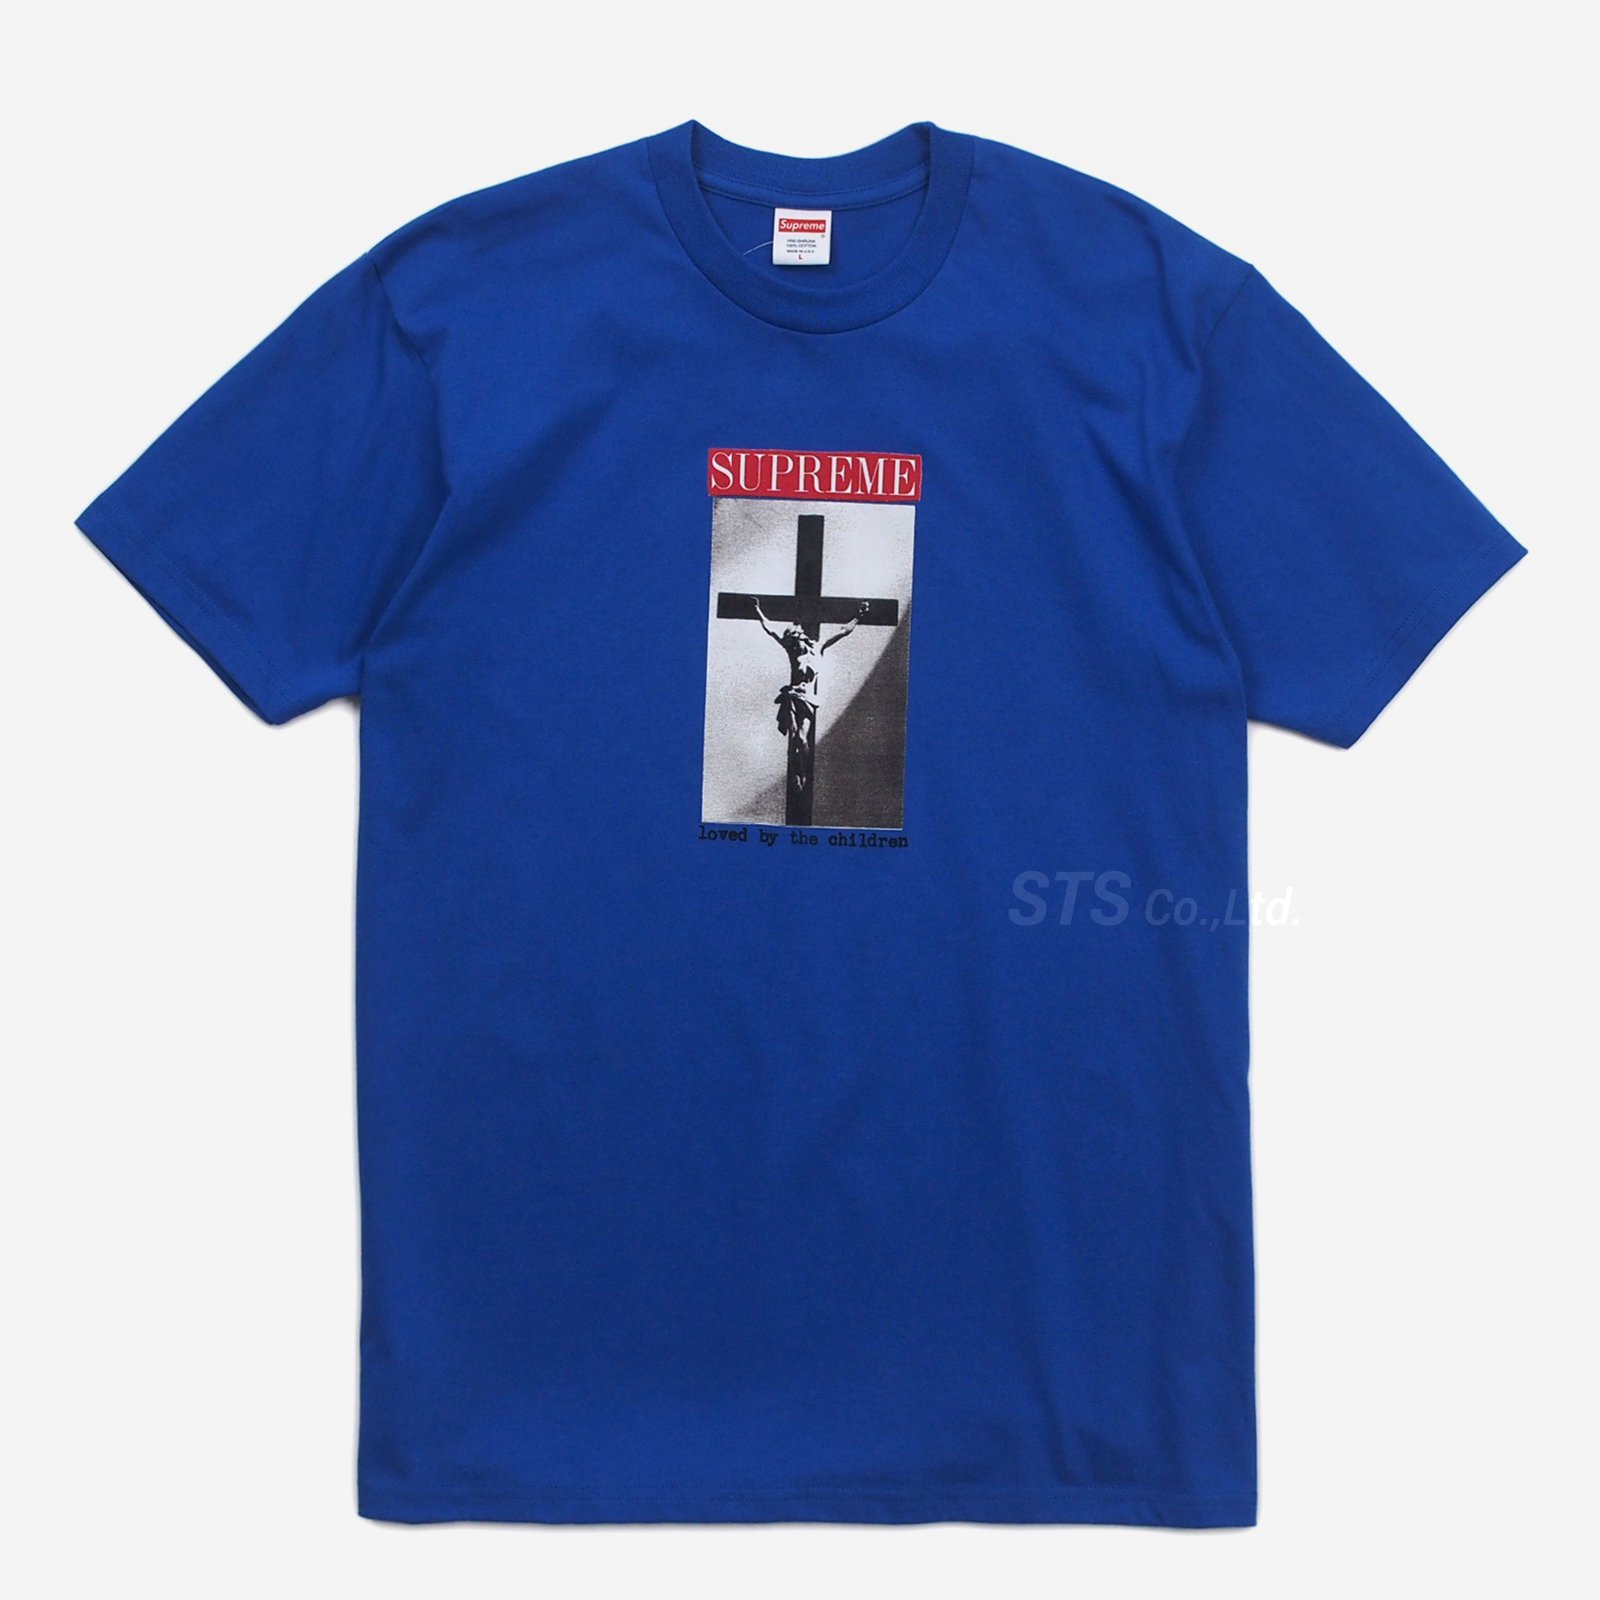 Tシャツ/カットソー(半袖/袖なし)Supreme Loved by The Children Tee 白　L